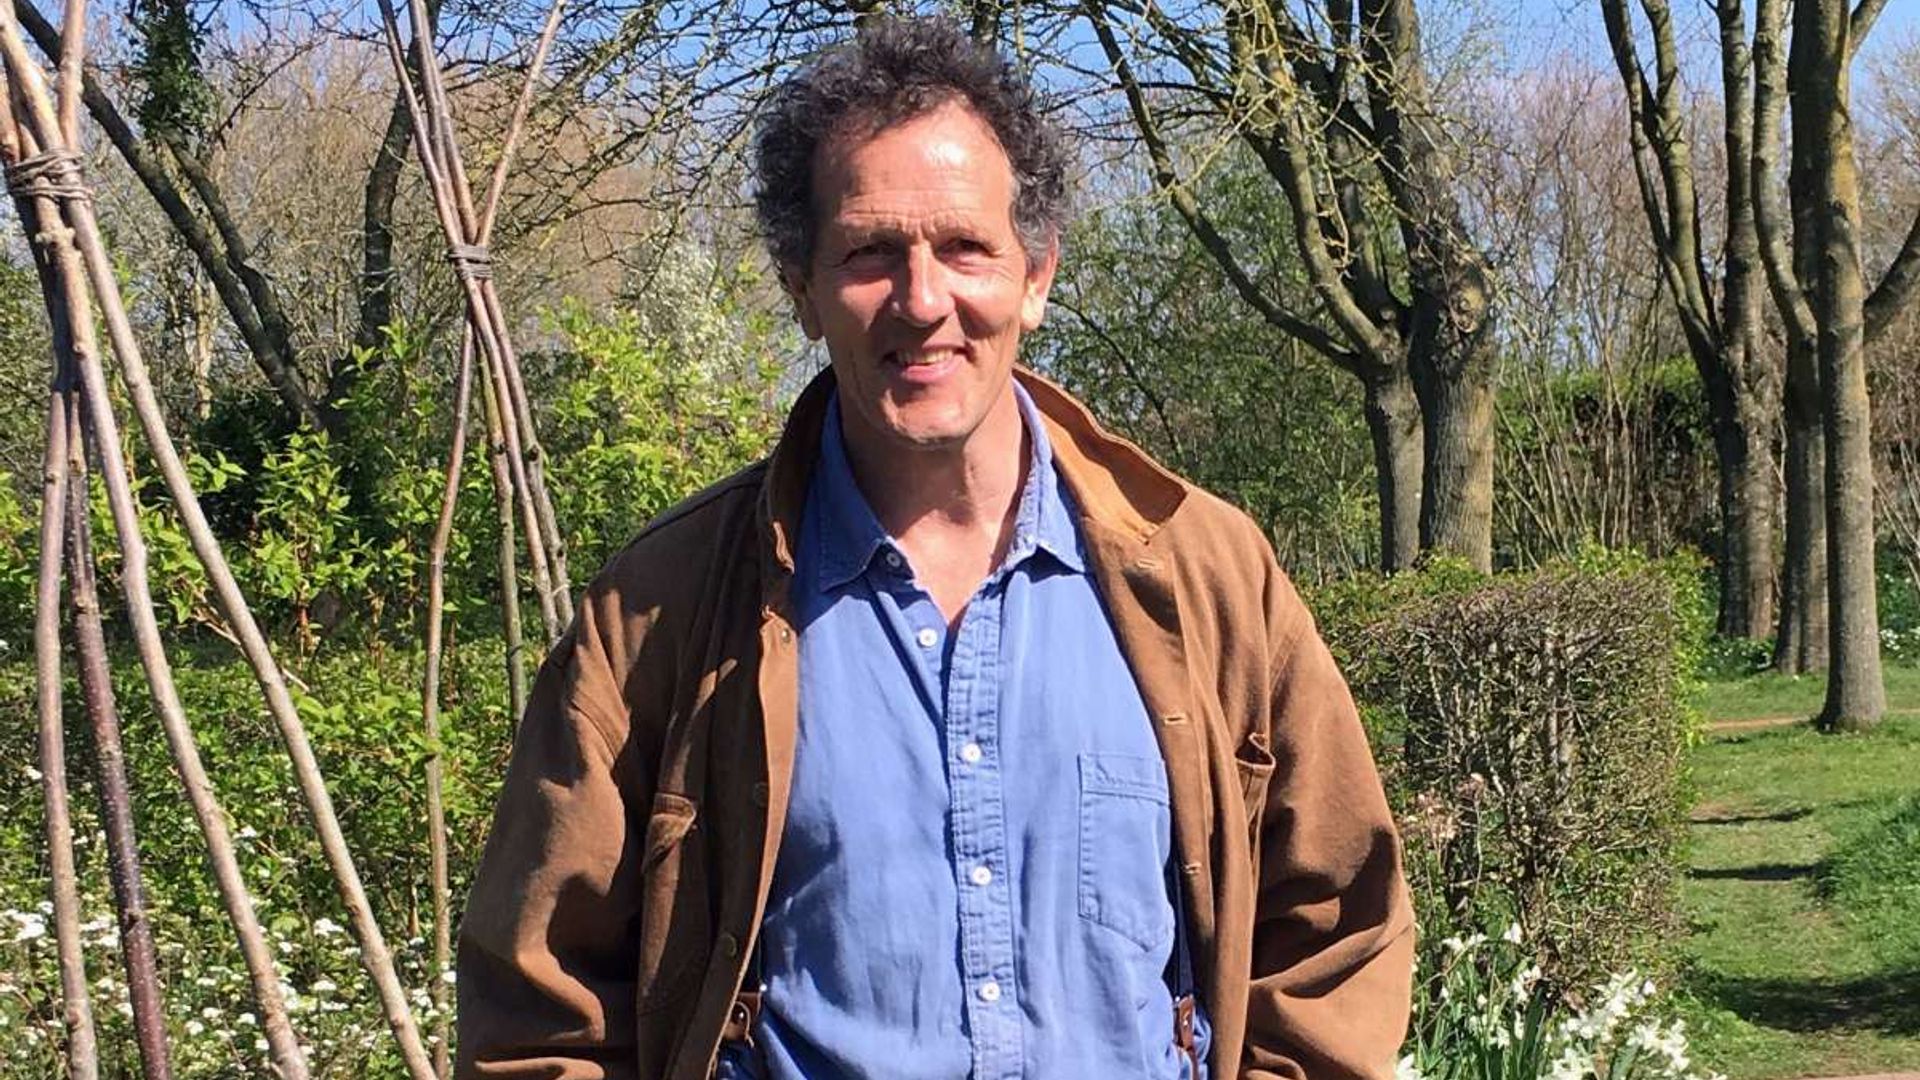 Gardeners' World fans frustrated after Monty Don makes disappointing announcement